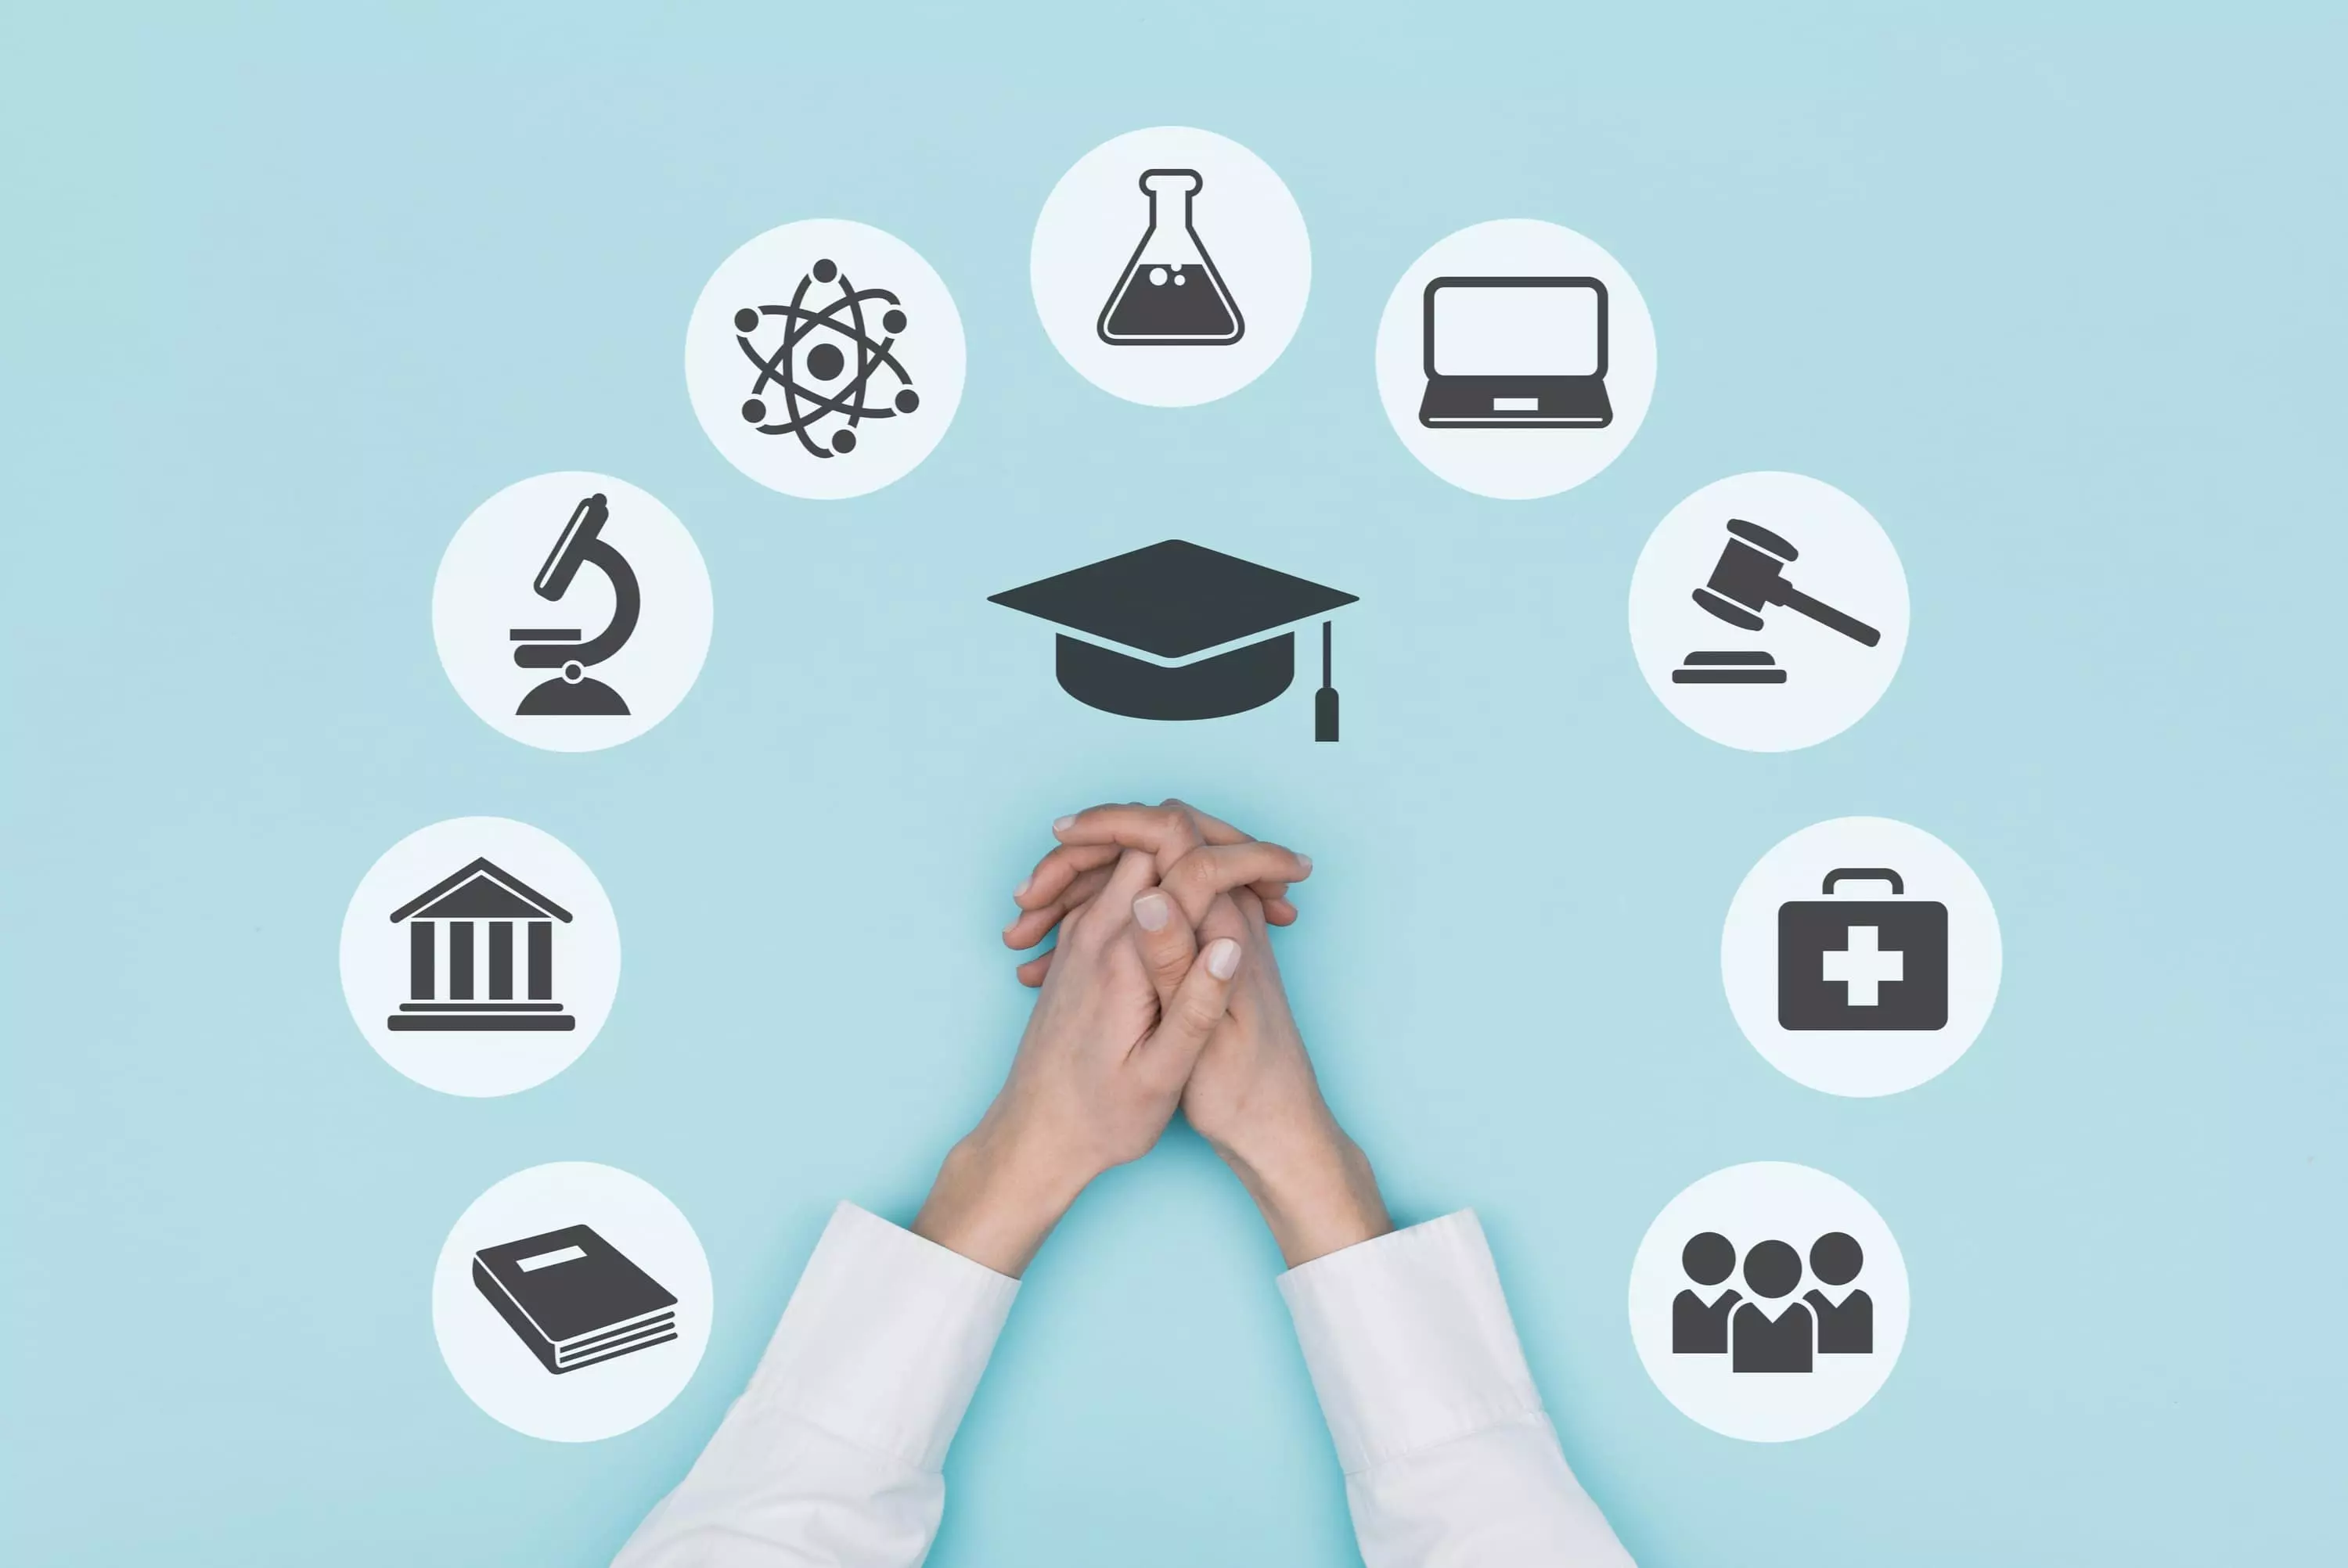 10 Best Career Options After Graduation in 2022